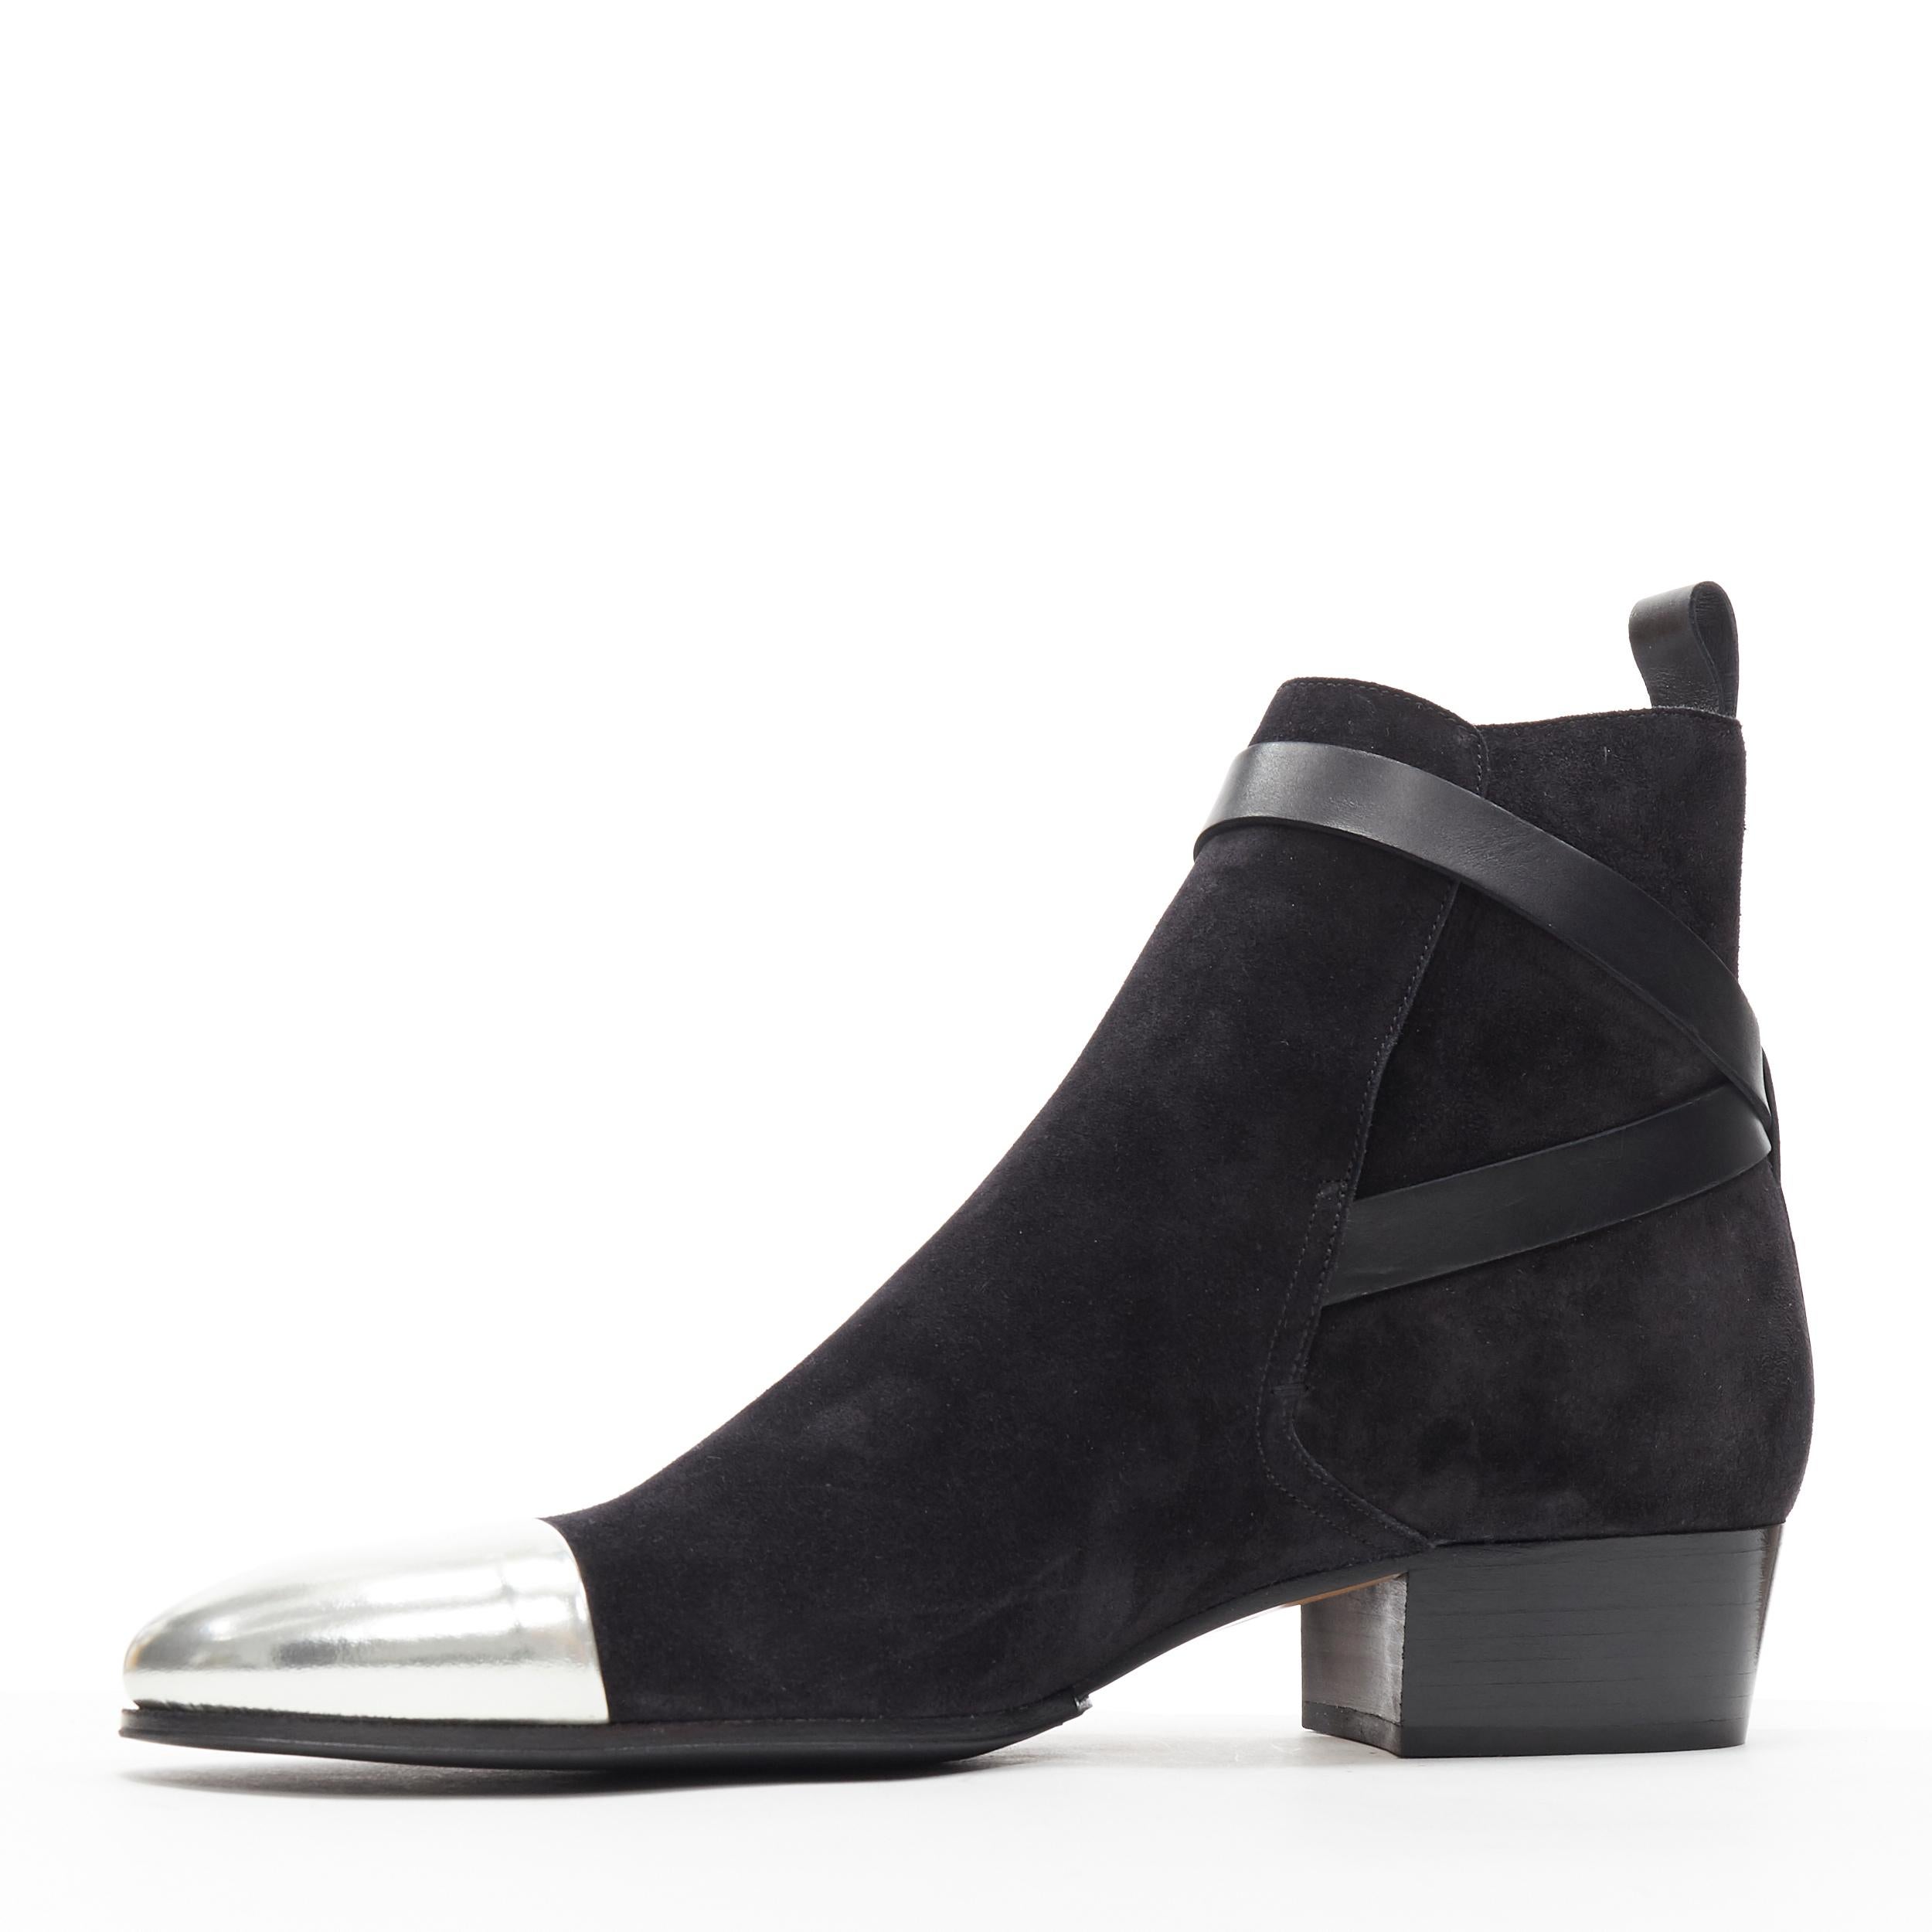 ankle boots with silver toe cap